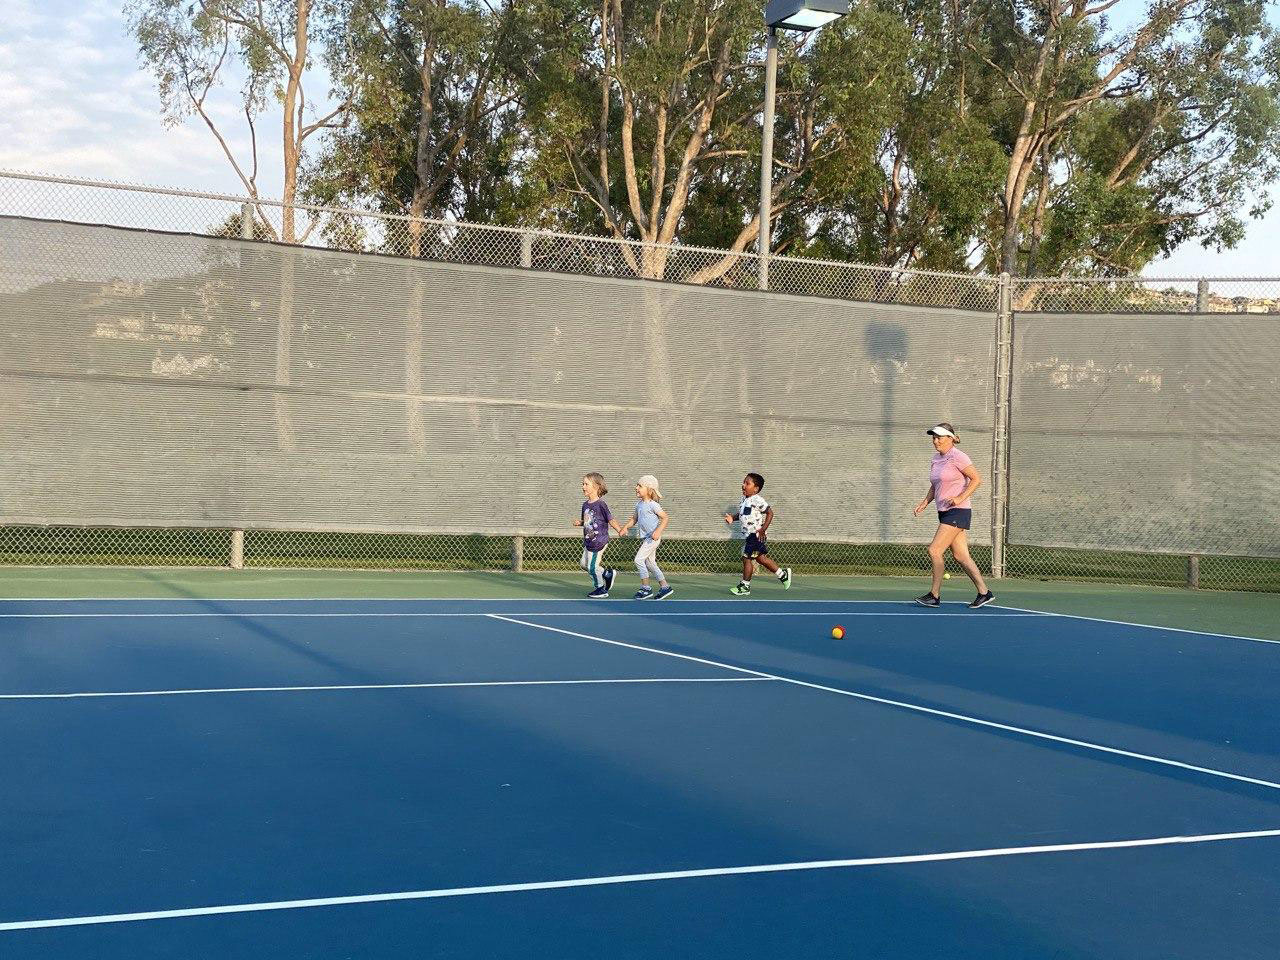 Tennis Lessons with Kids